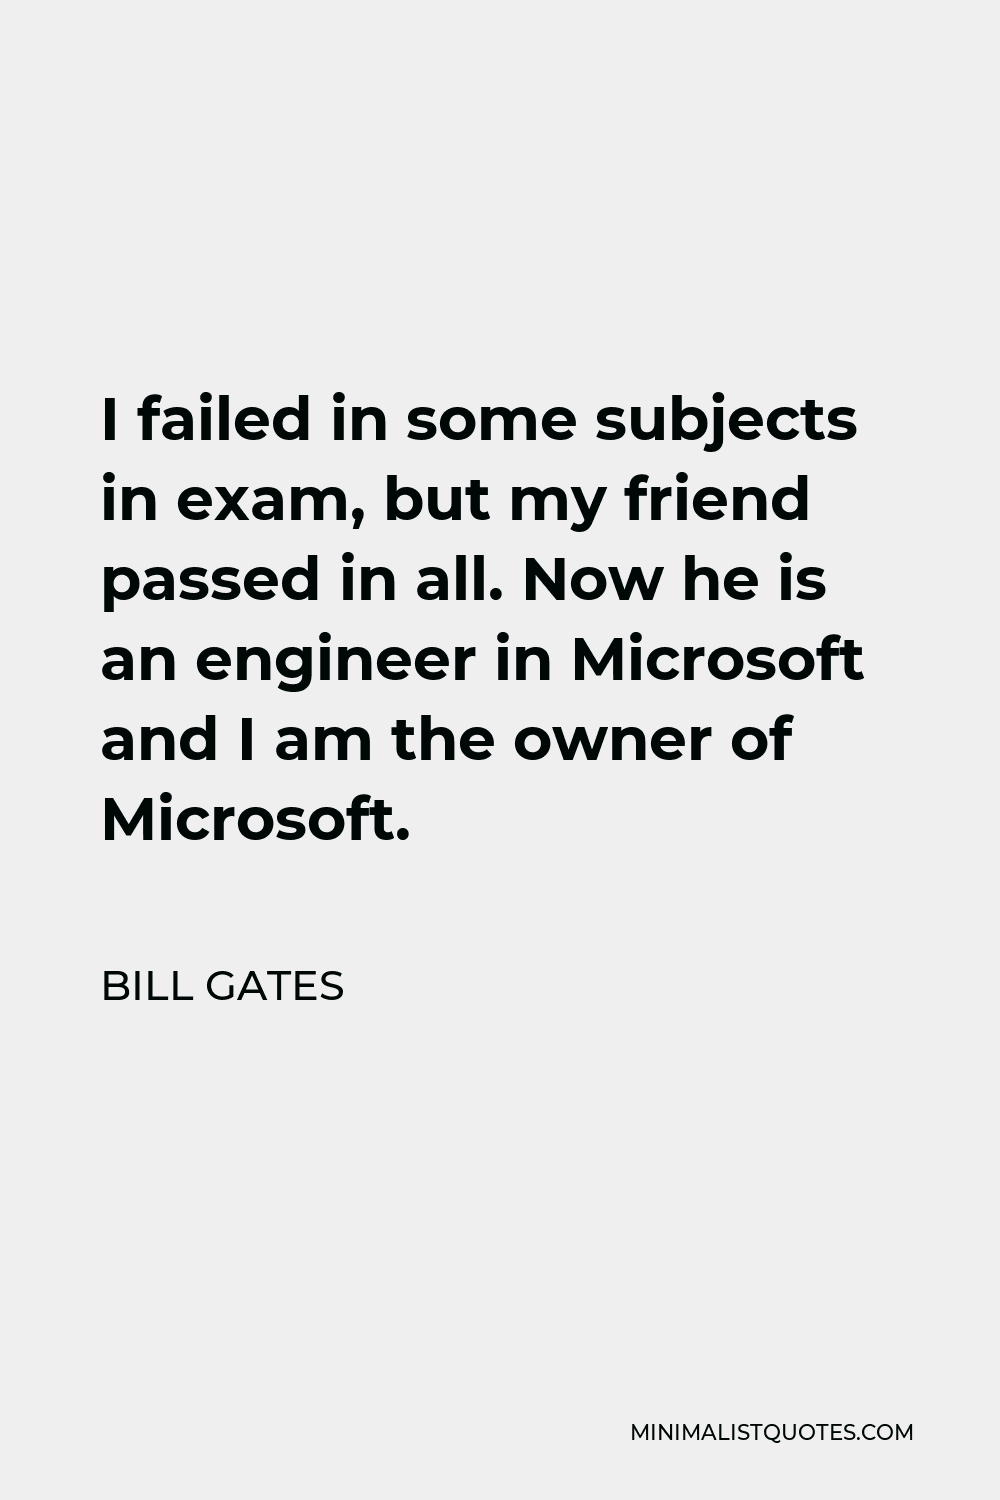 Bill Gates Quote - I failed in some subjects in exam, but my friend passed in all. Now he is an engineer in Microsoft and I am the owner of Microsoft.